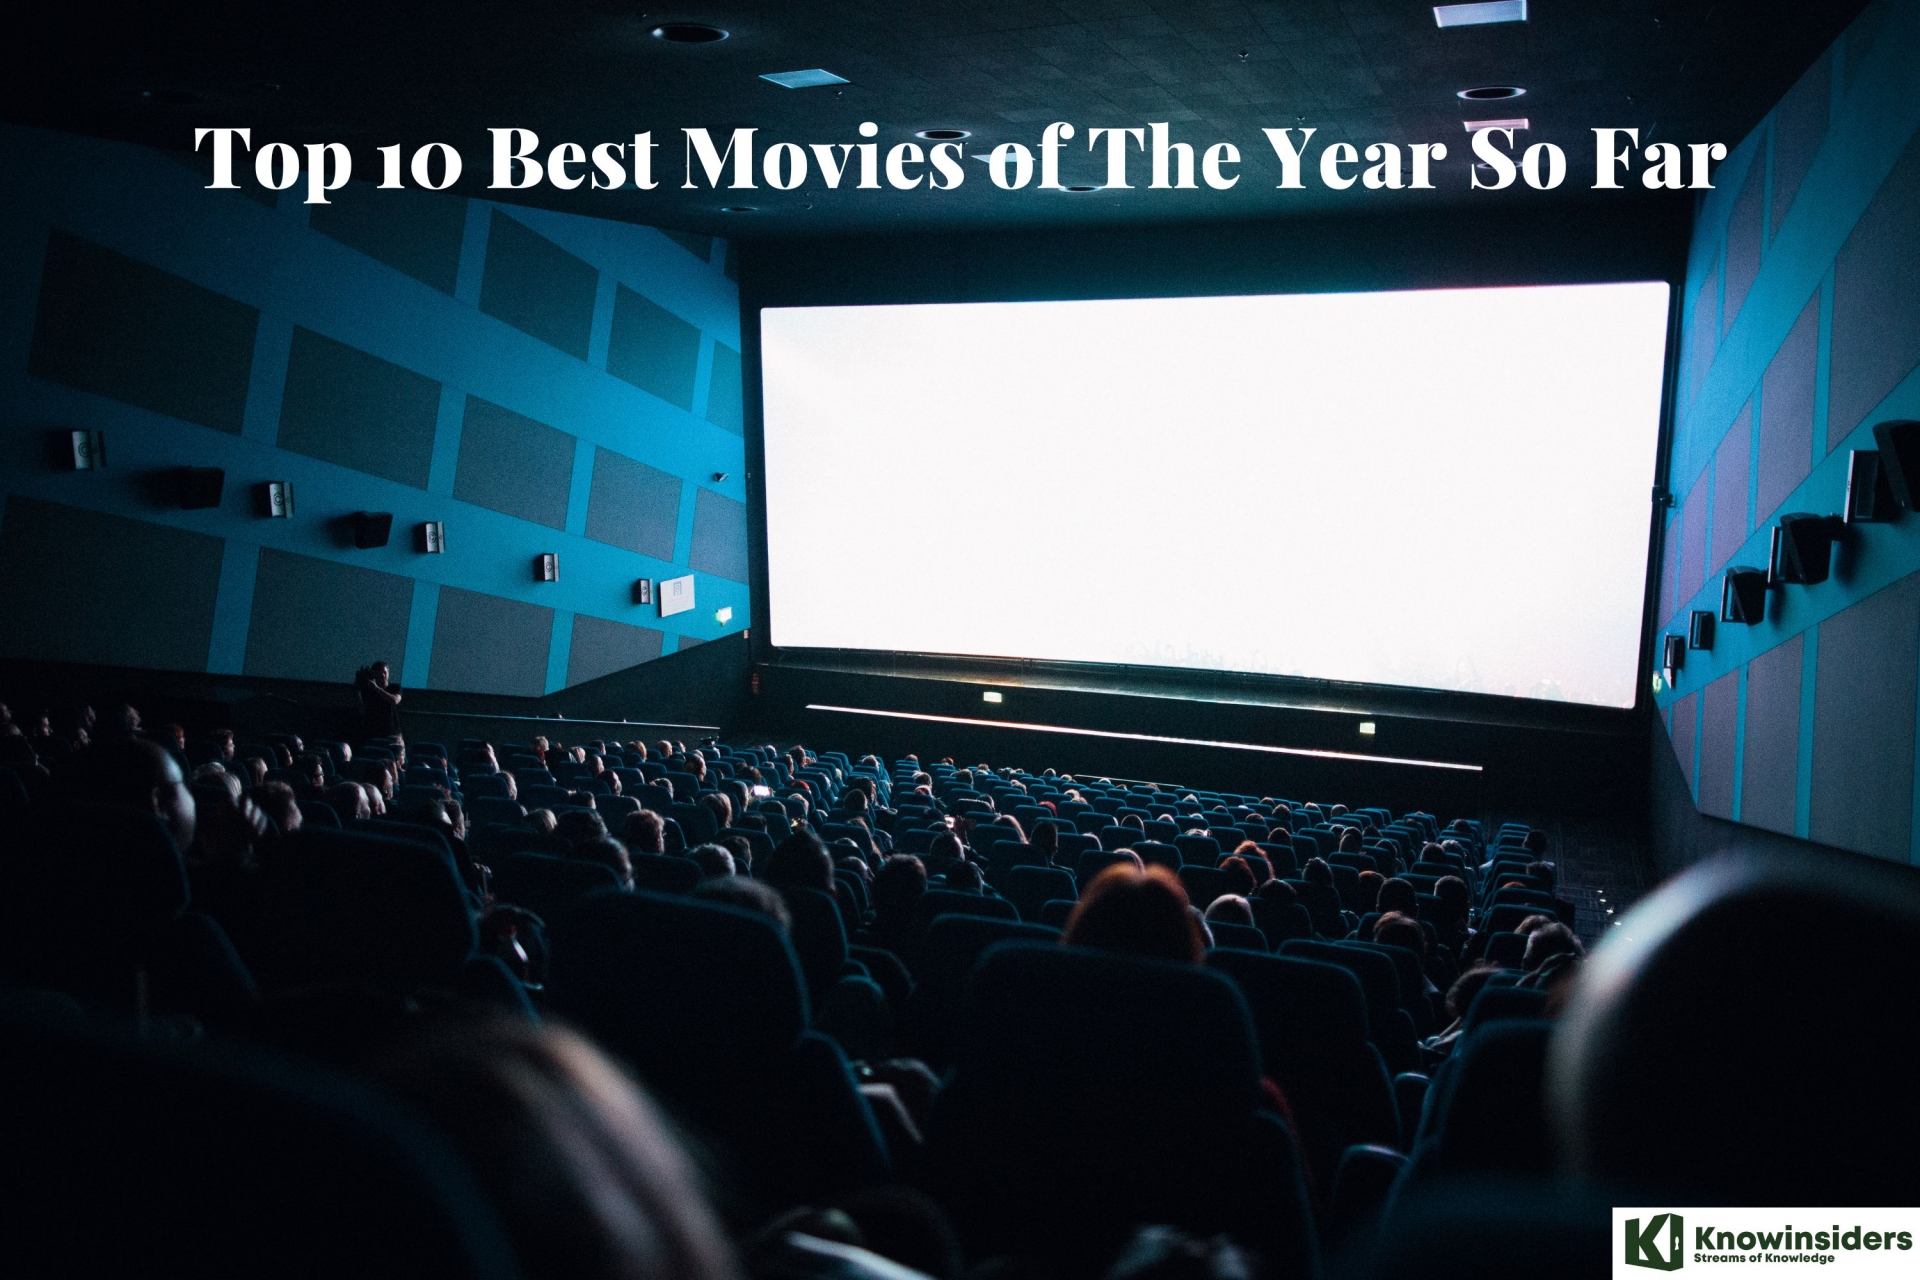 Top 10 Best Movies of The Year So Far